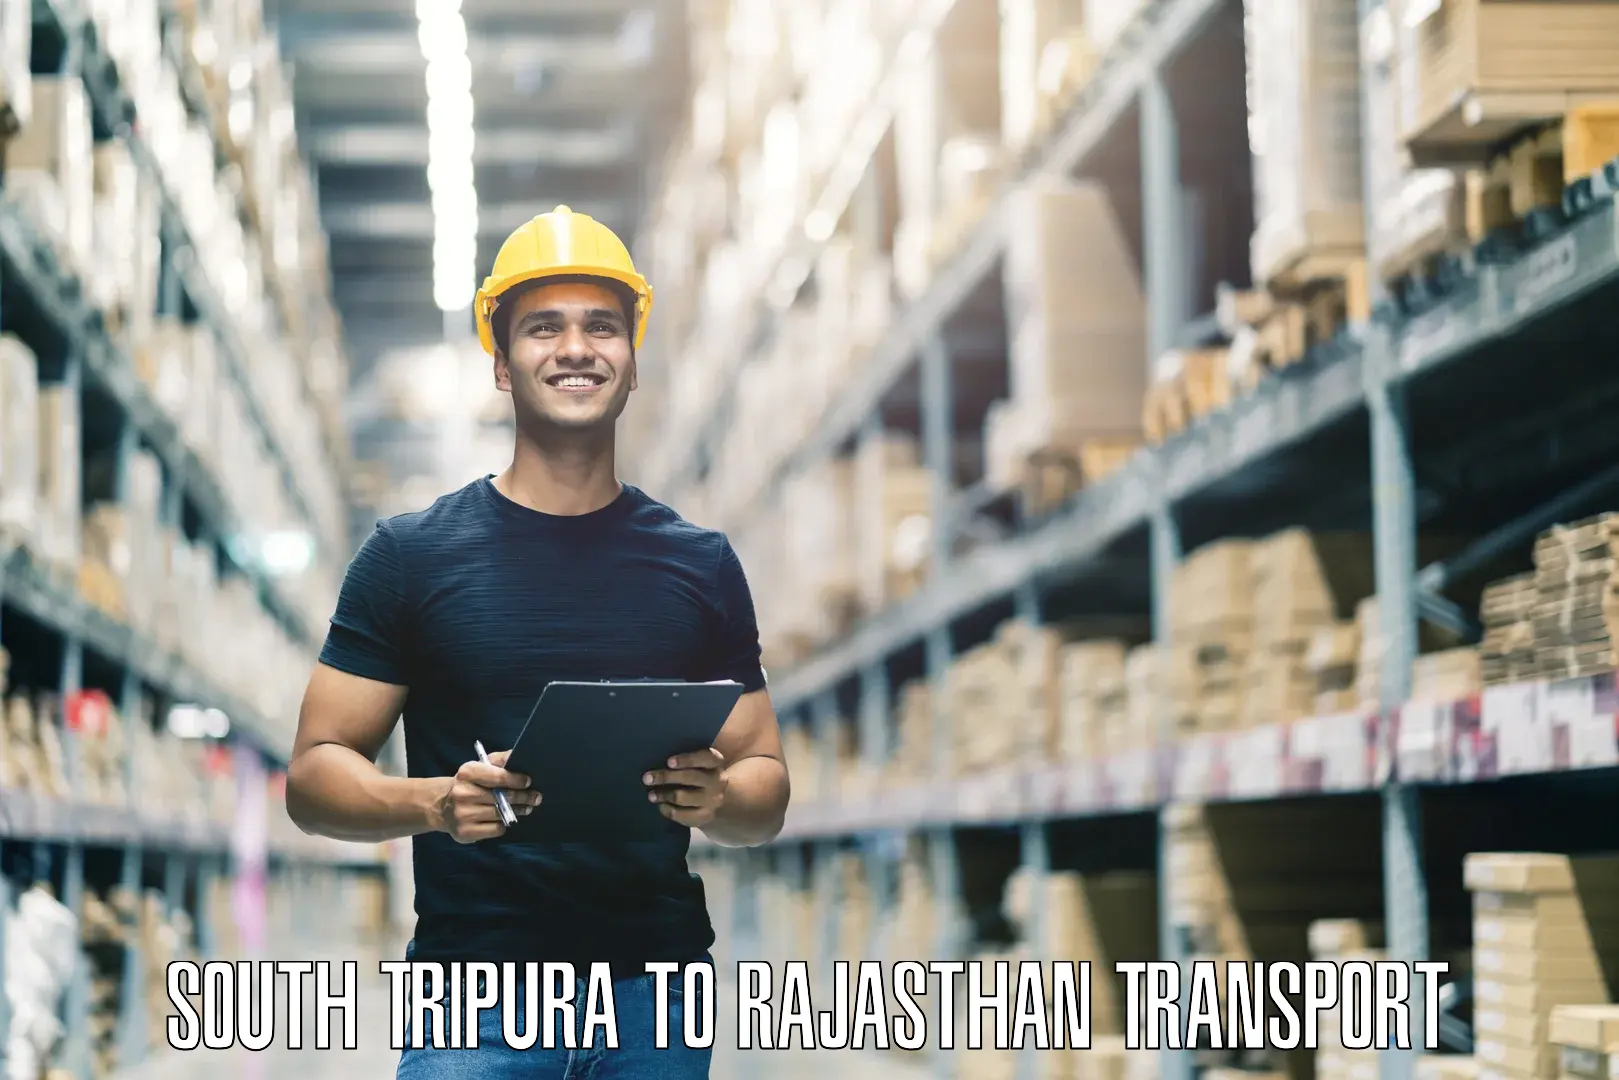 Goods delivery service South Tripura to Suratgarh